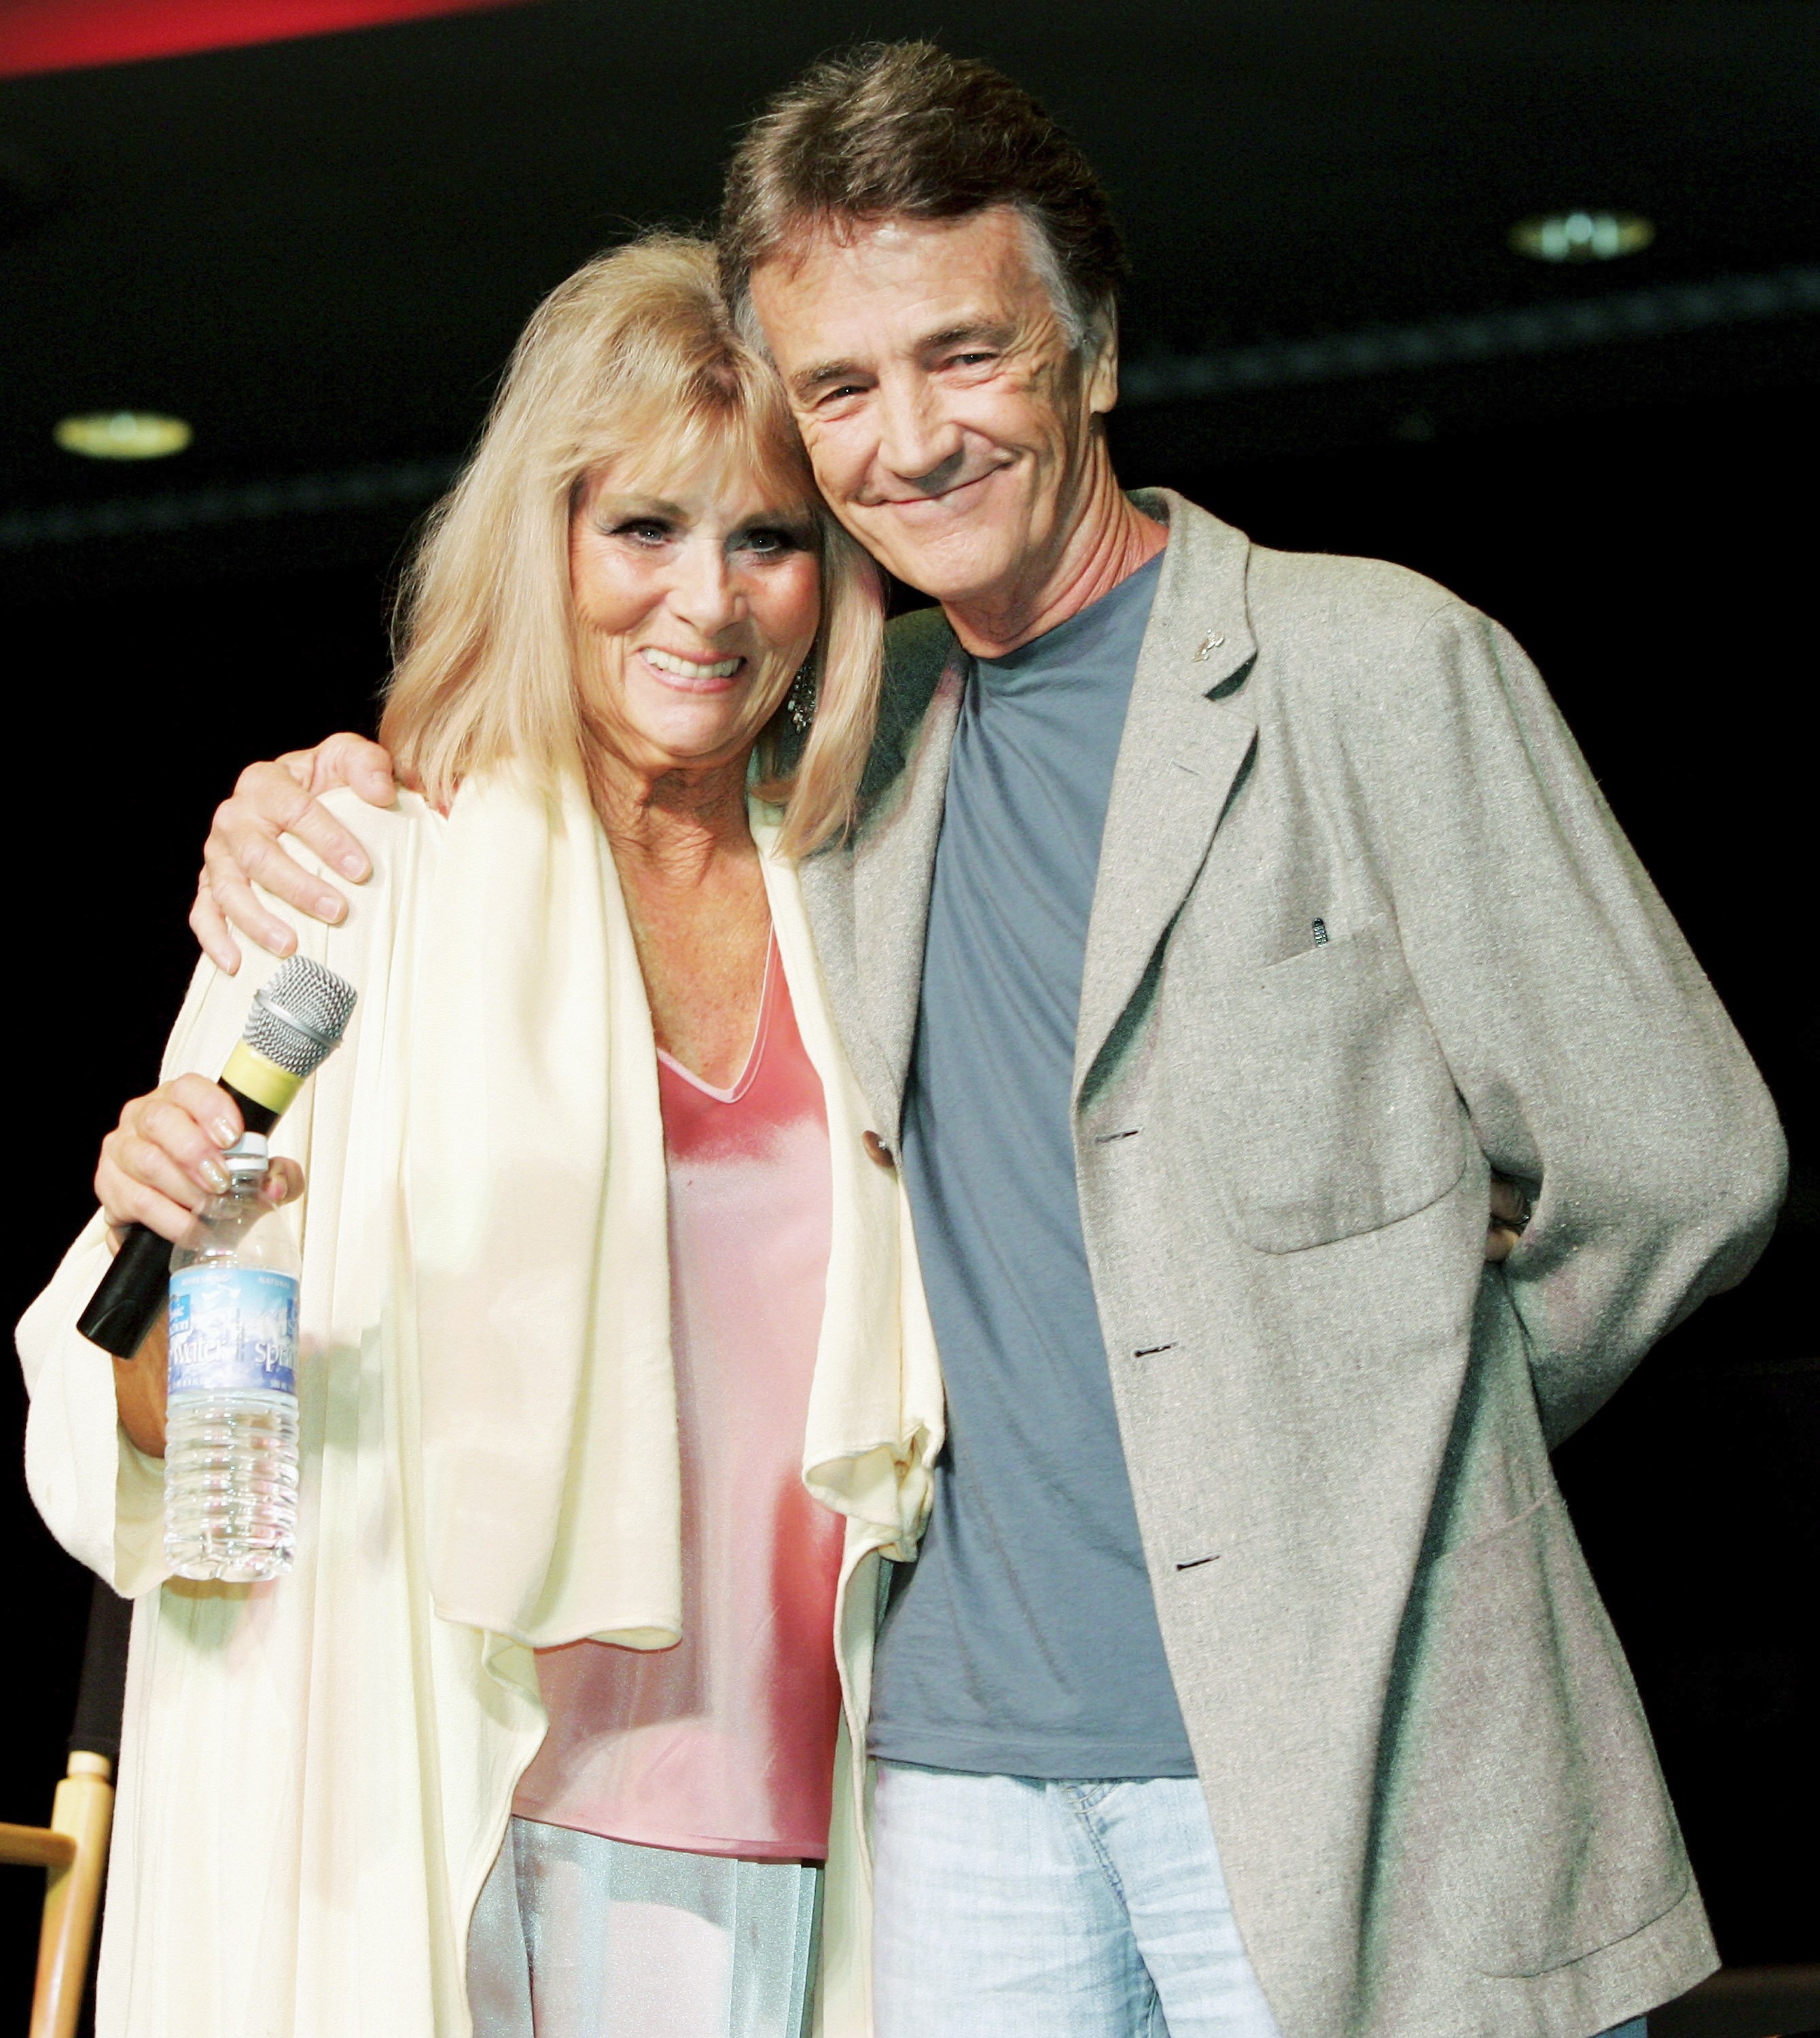 Grace Lee Whitney, who played Janice Rand in the original "Star Trek" television series and films, and actor Robert Walker Jr, who played the character Charlie Evans pose at the Star Trek convention at the Las Vegas Hilton August 11, 2005, in Las Vegas, Nevada | Photo: Ethan Miller/Getty Images